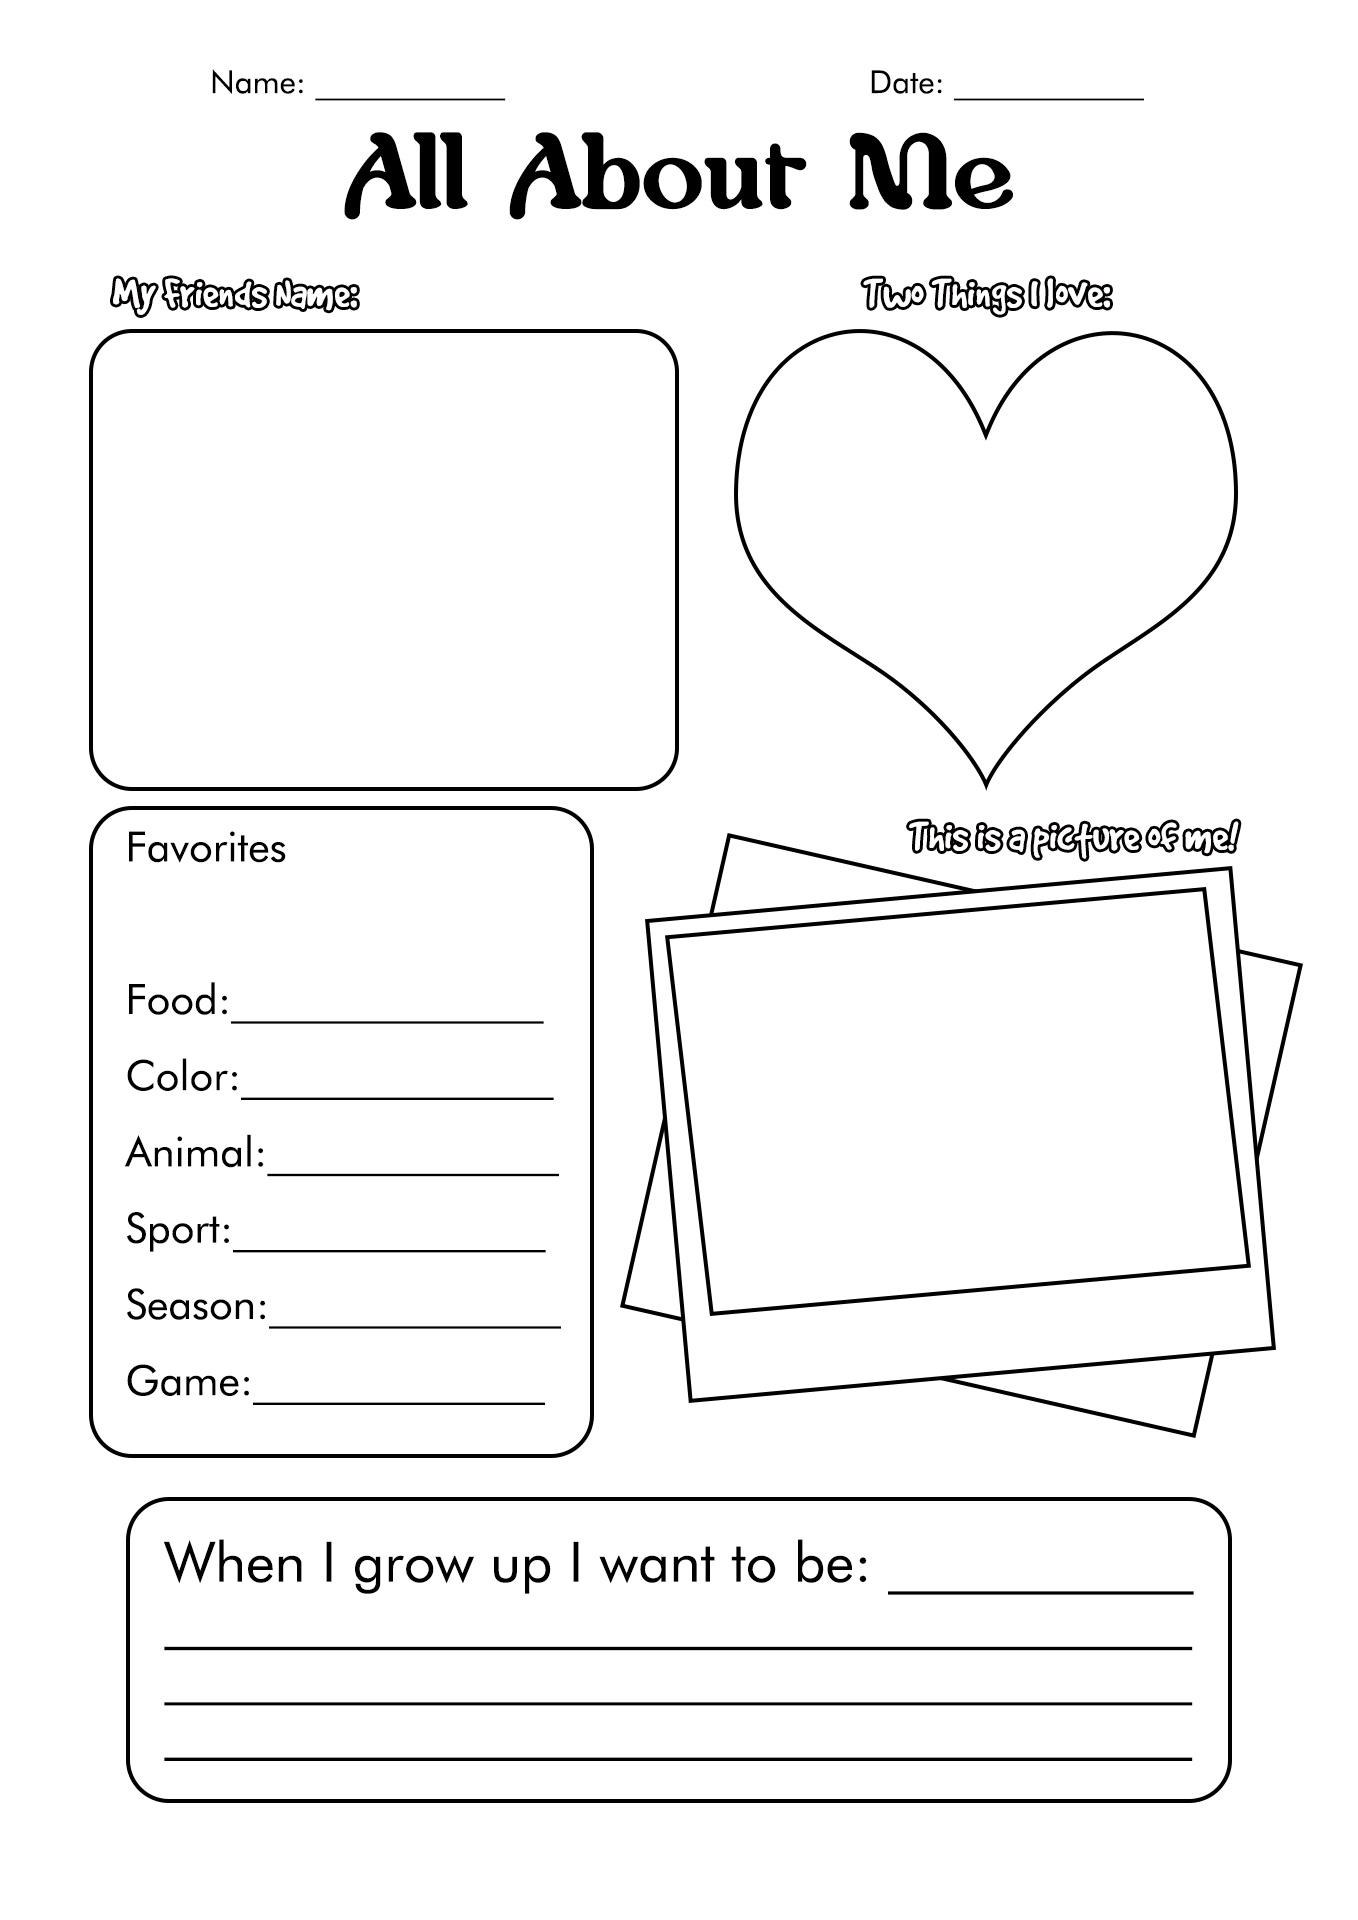 All About Me Printables Free Image